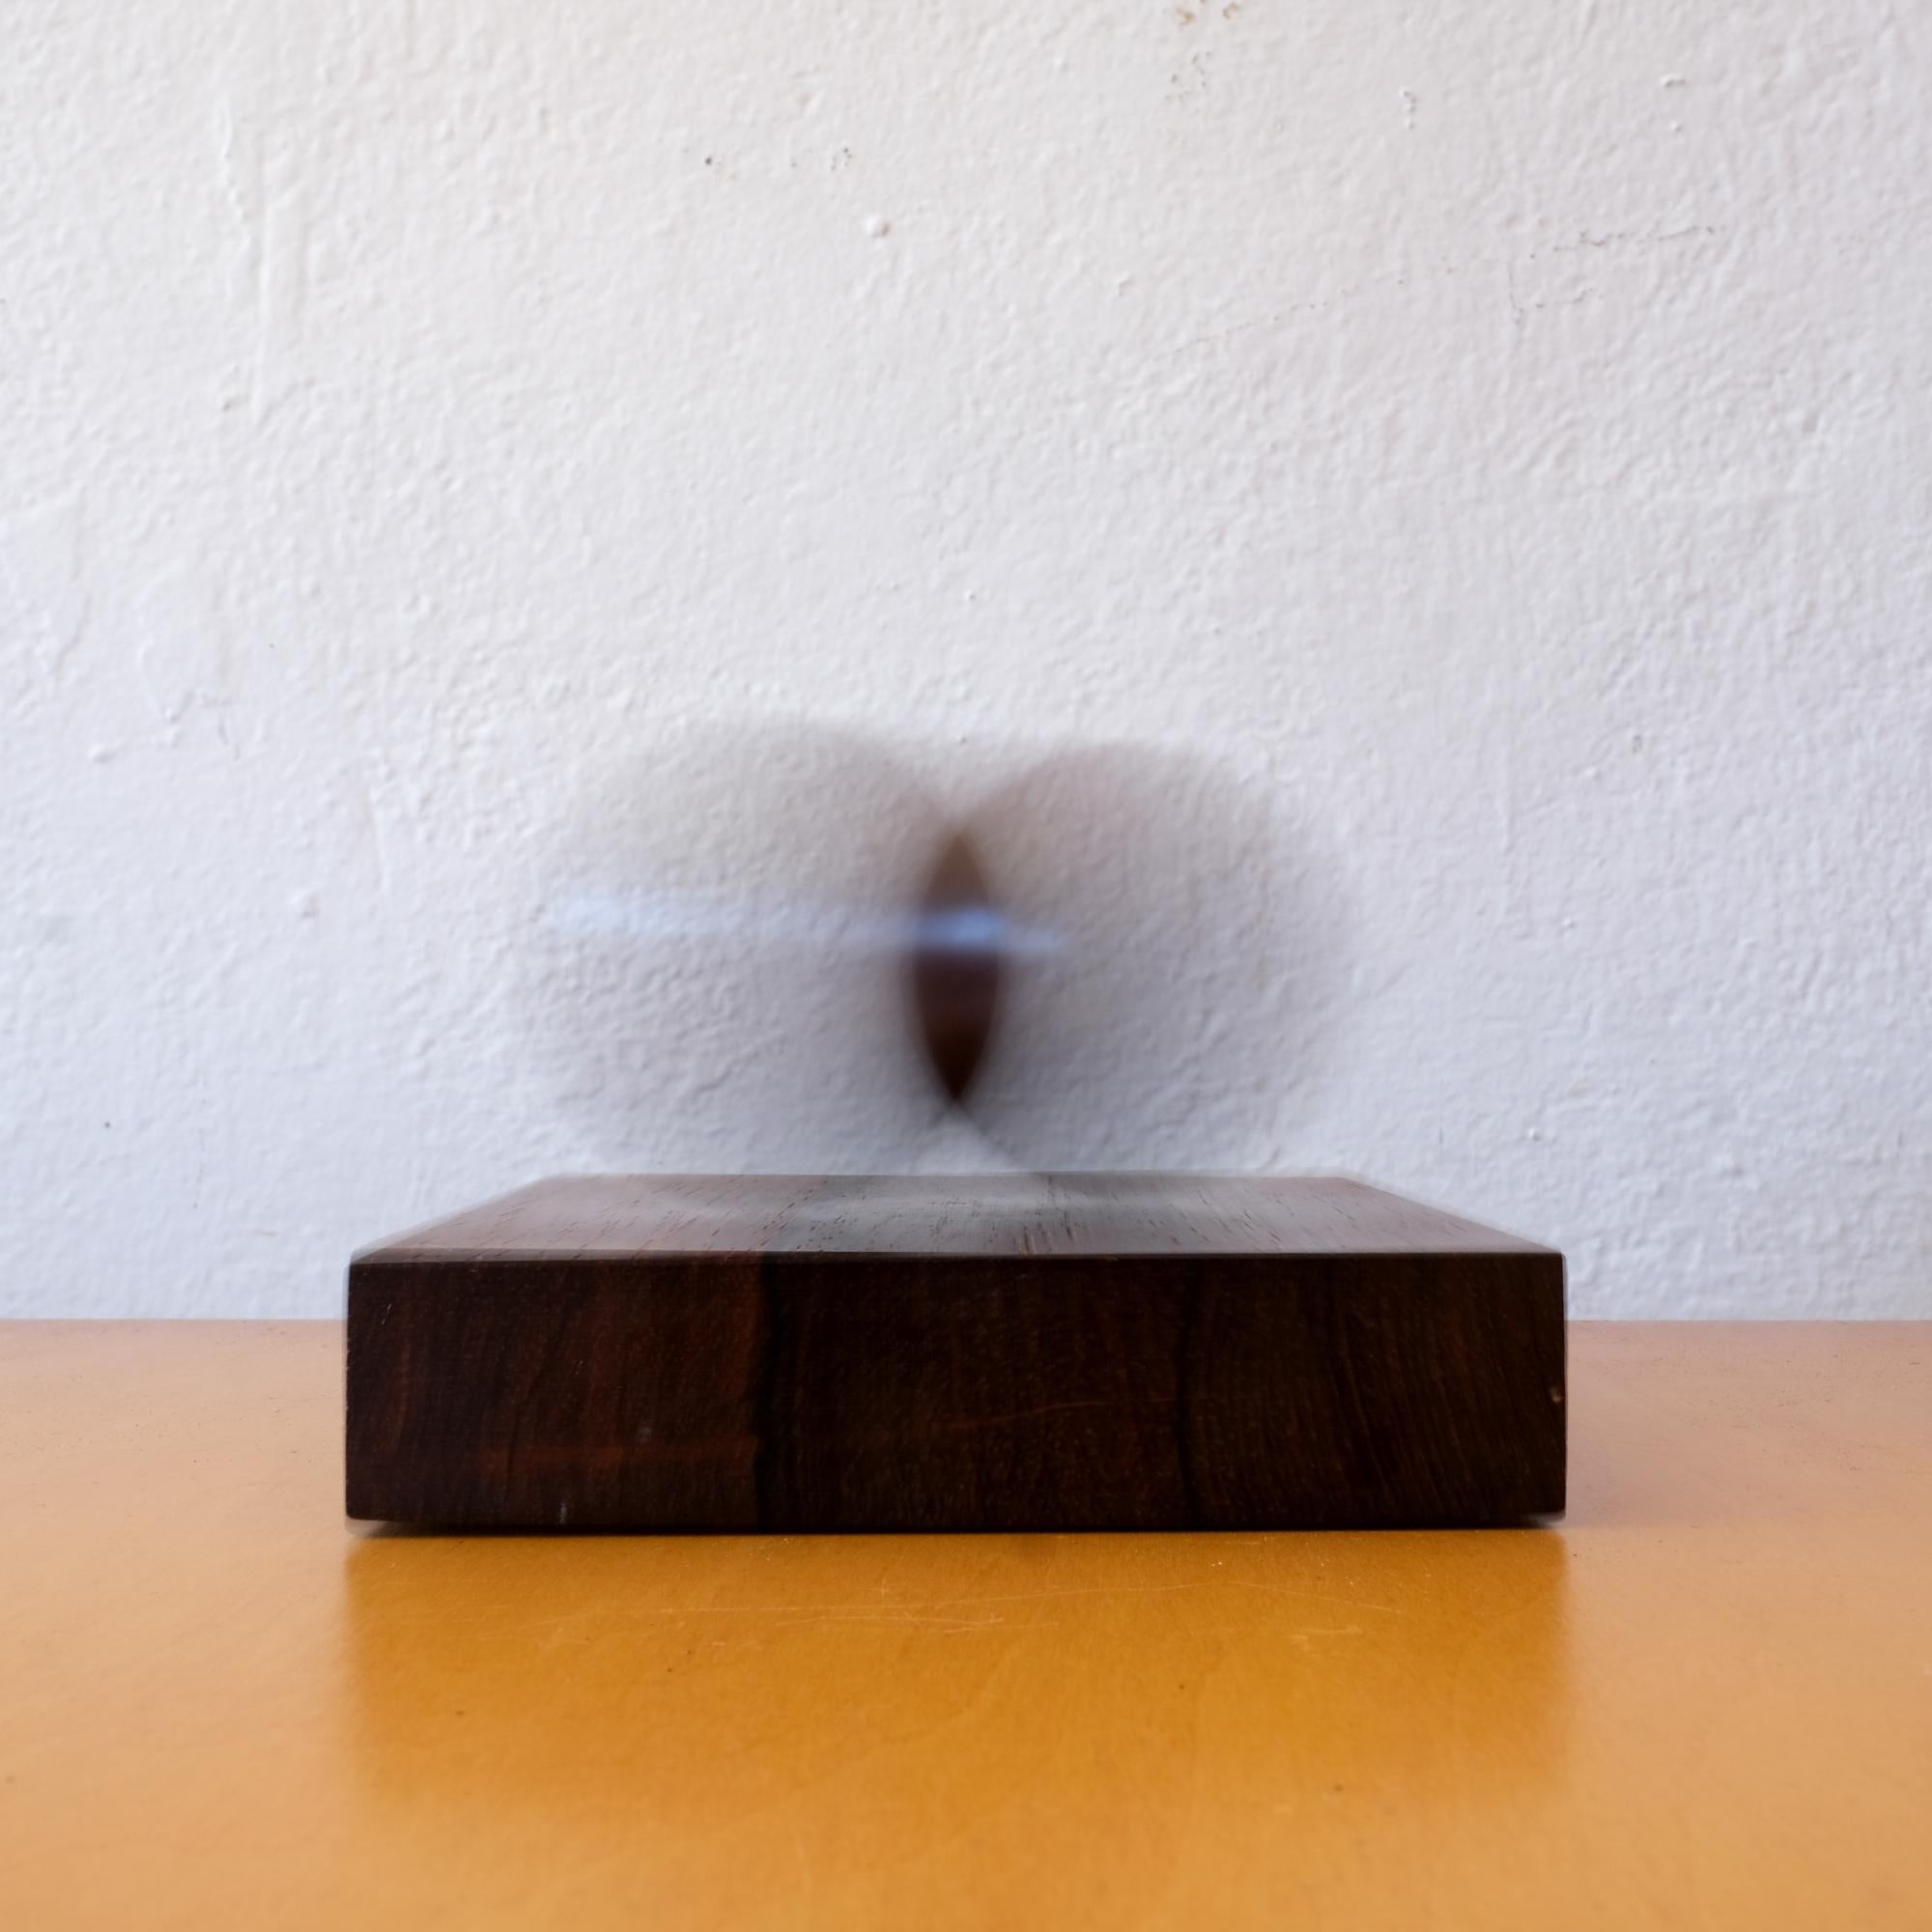 Rosewood kinetic sculpture by Sven Petersen for SAAP. The rosewood ball moves back and forth after pulled and released. 

From the estate of the owners of Frank Bros, the revolutionary design store that provided furnishings to many of the Case